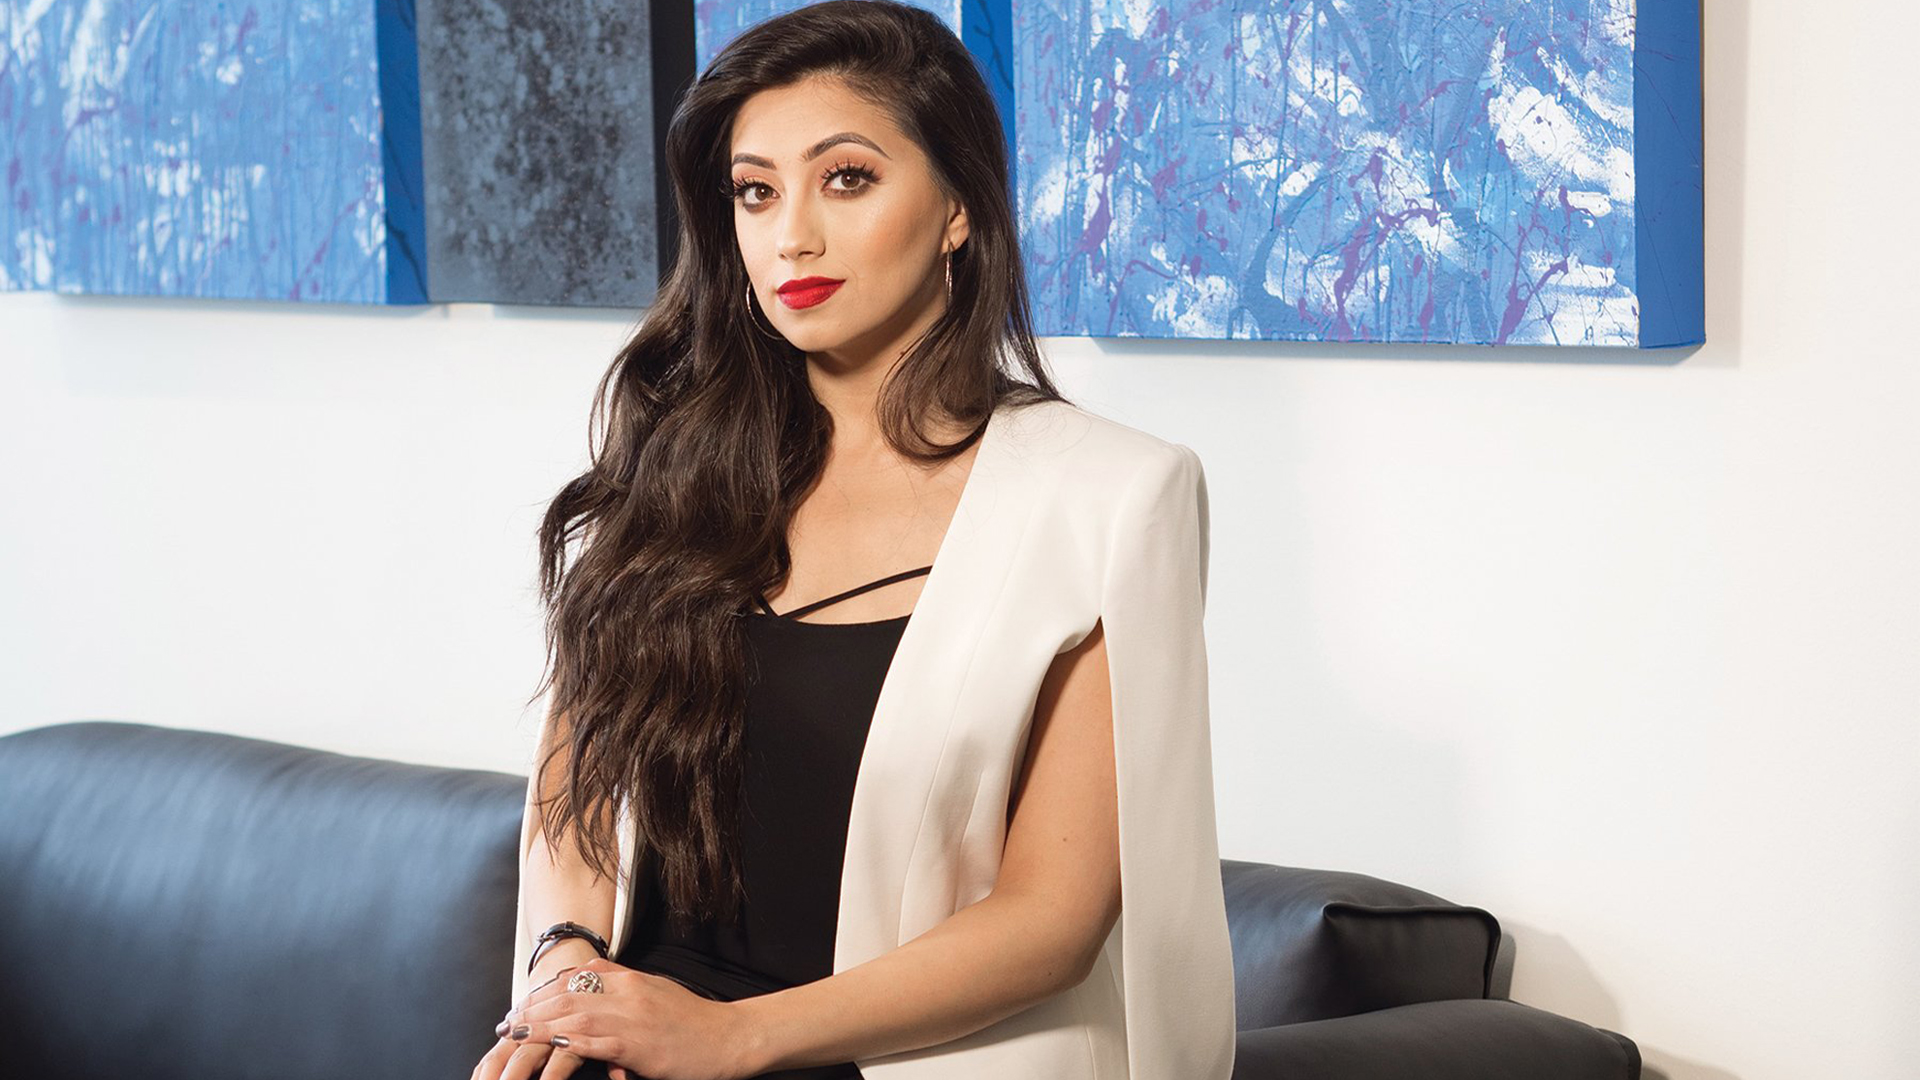 Pt. 2: Shama Hyder on Technology and the Future of Social Media